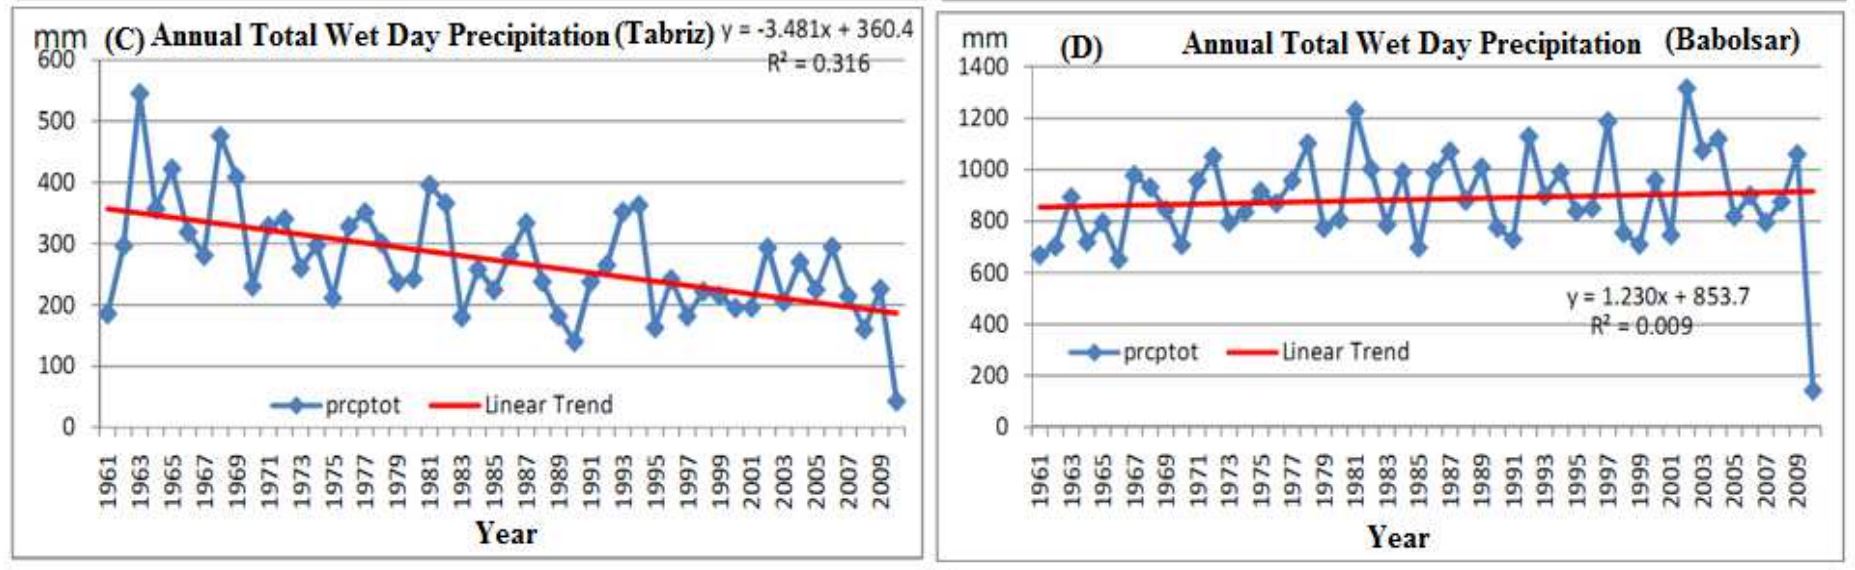 Time series trends of precipitation extremes in different stations, annual total wet days, Tabriz, babolsar